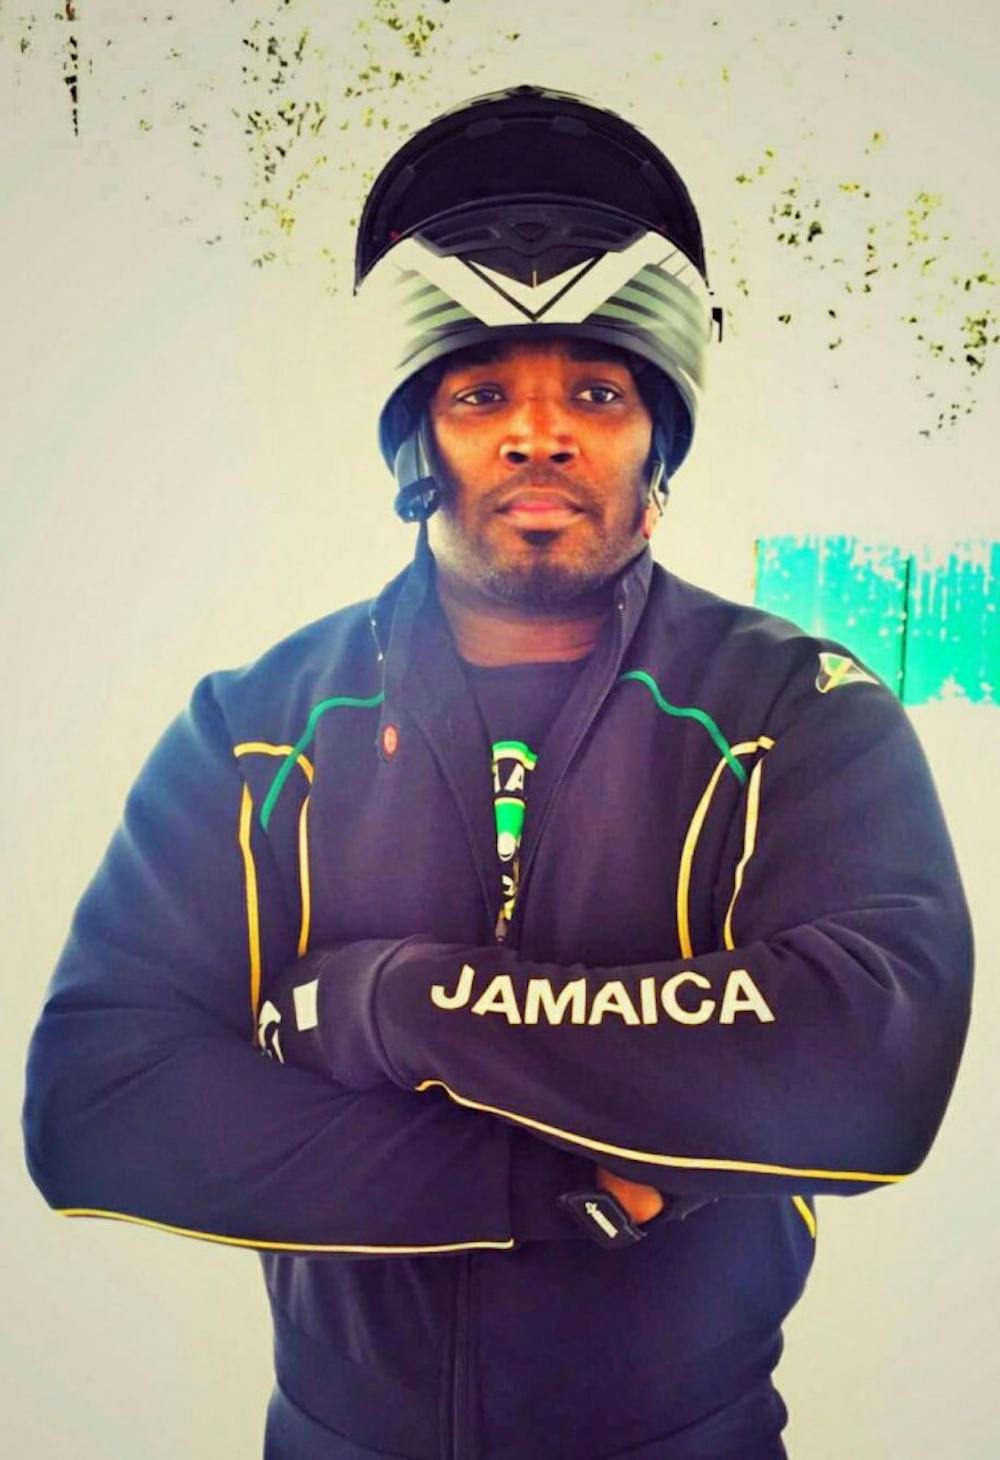 <p>Ball State alum Michael Blair hoped to represent team Jamaica in bobsled at the 2018 PyeongChang Winter Olympics. Blair re-emerged to the athletic scene 11 years after retiring from playing professional football. <strong>Michael Blair, Photo Provided</strong></p>